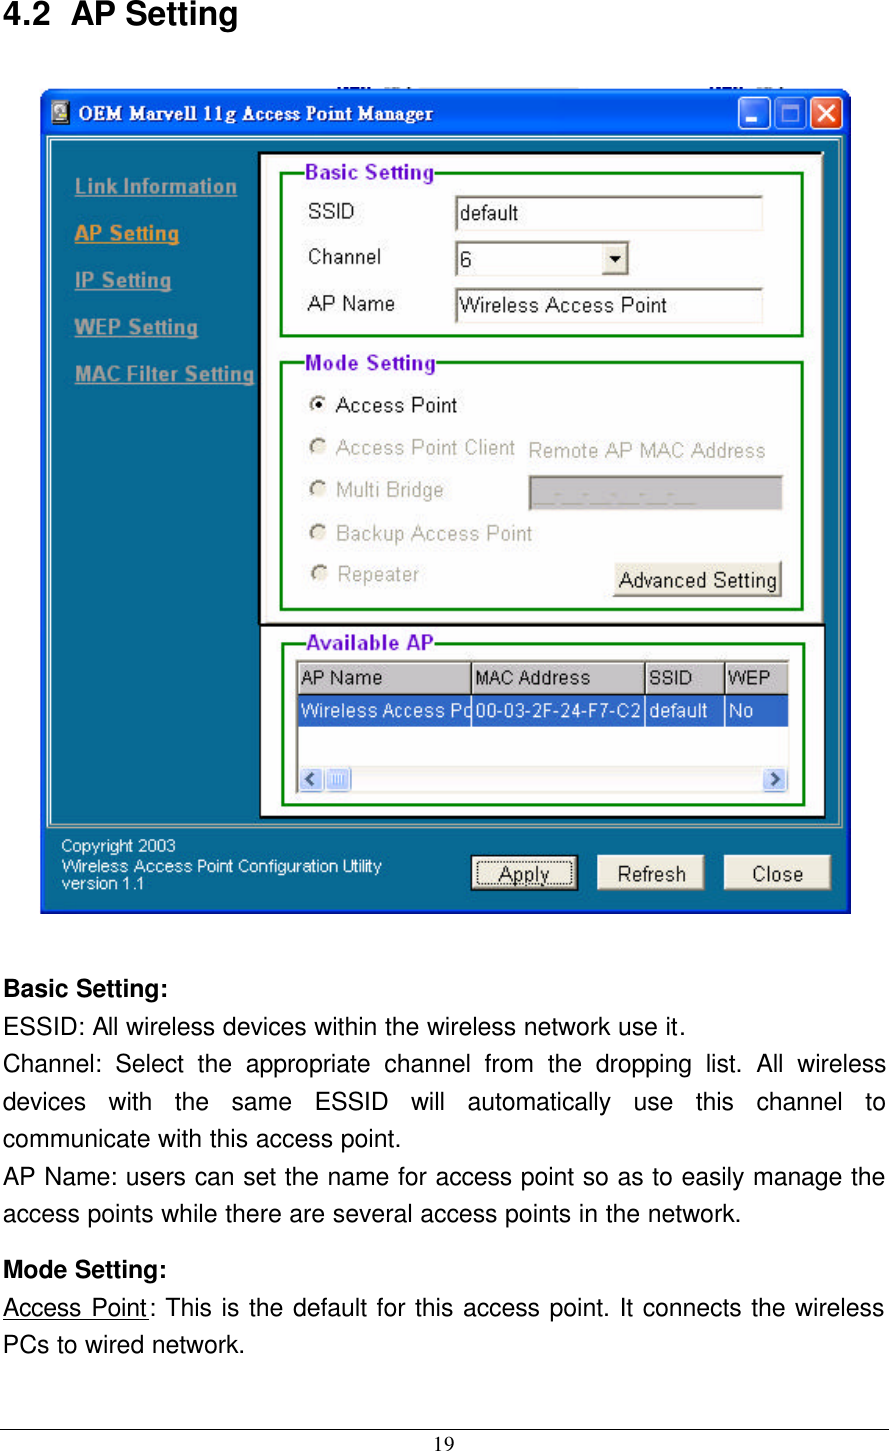  19 4.2  AP Setting   Basic Setting: ESSID: All wireless devices within the wireless network use it. Channel: Select the appropriate channel from the dropping list. All wireless devices with the same ESSID will automatically use this channel to communicate with this access point. AP Name: users can set the name for access point so as to easily manage the access points while there are several access points in the network. Mode Setting: Access Point: This is the default for this access point. It connects the wireless PCs to wired network.  